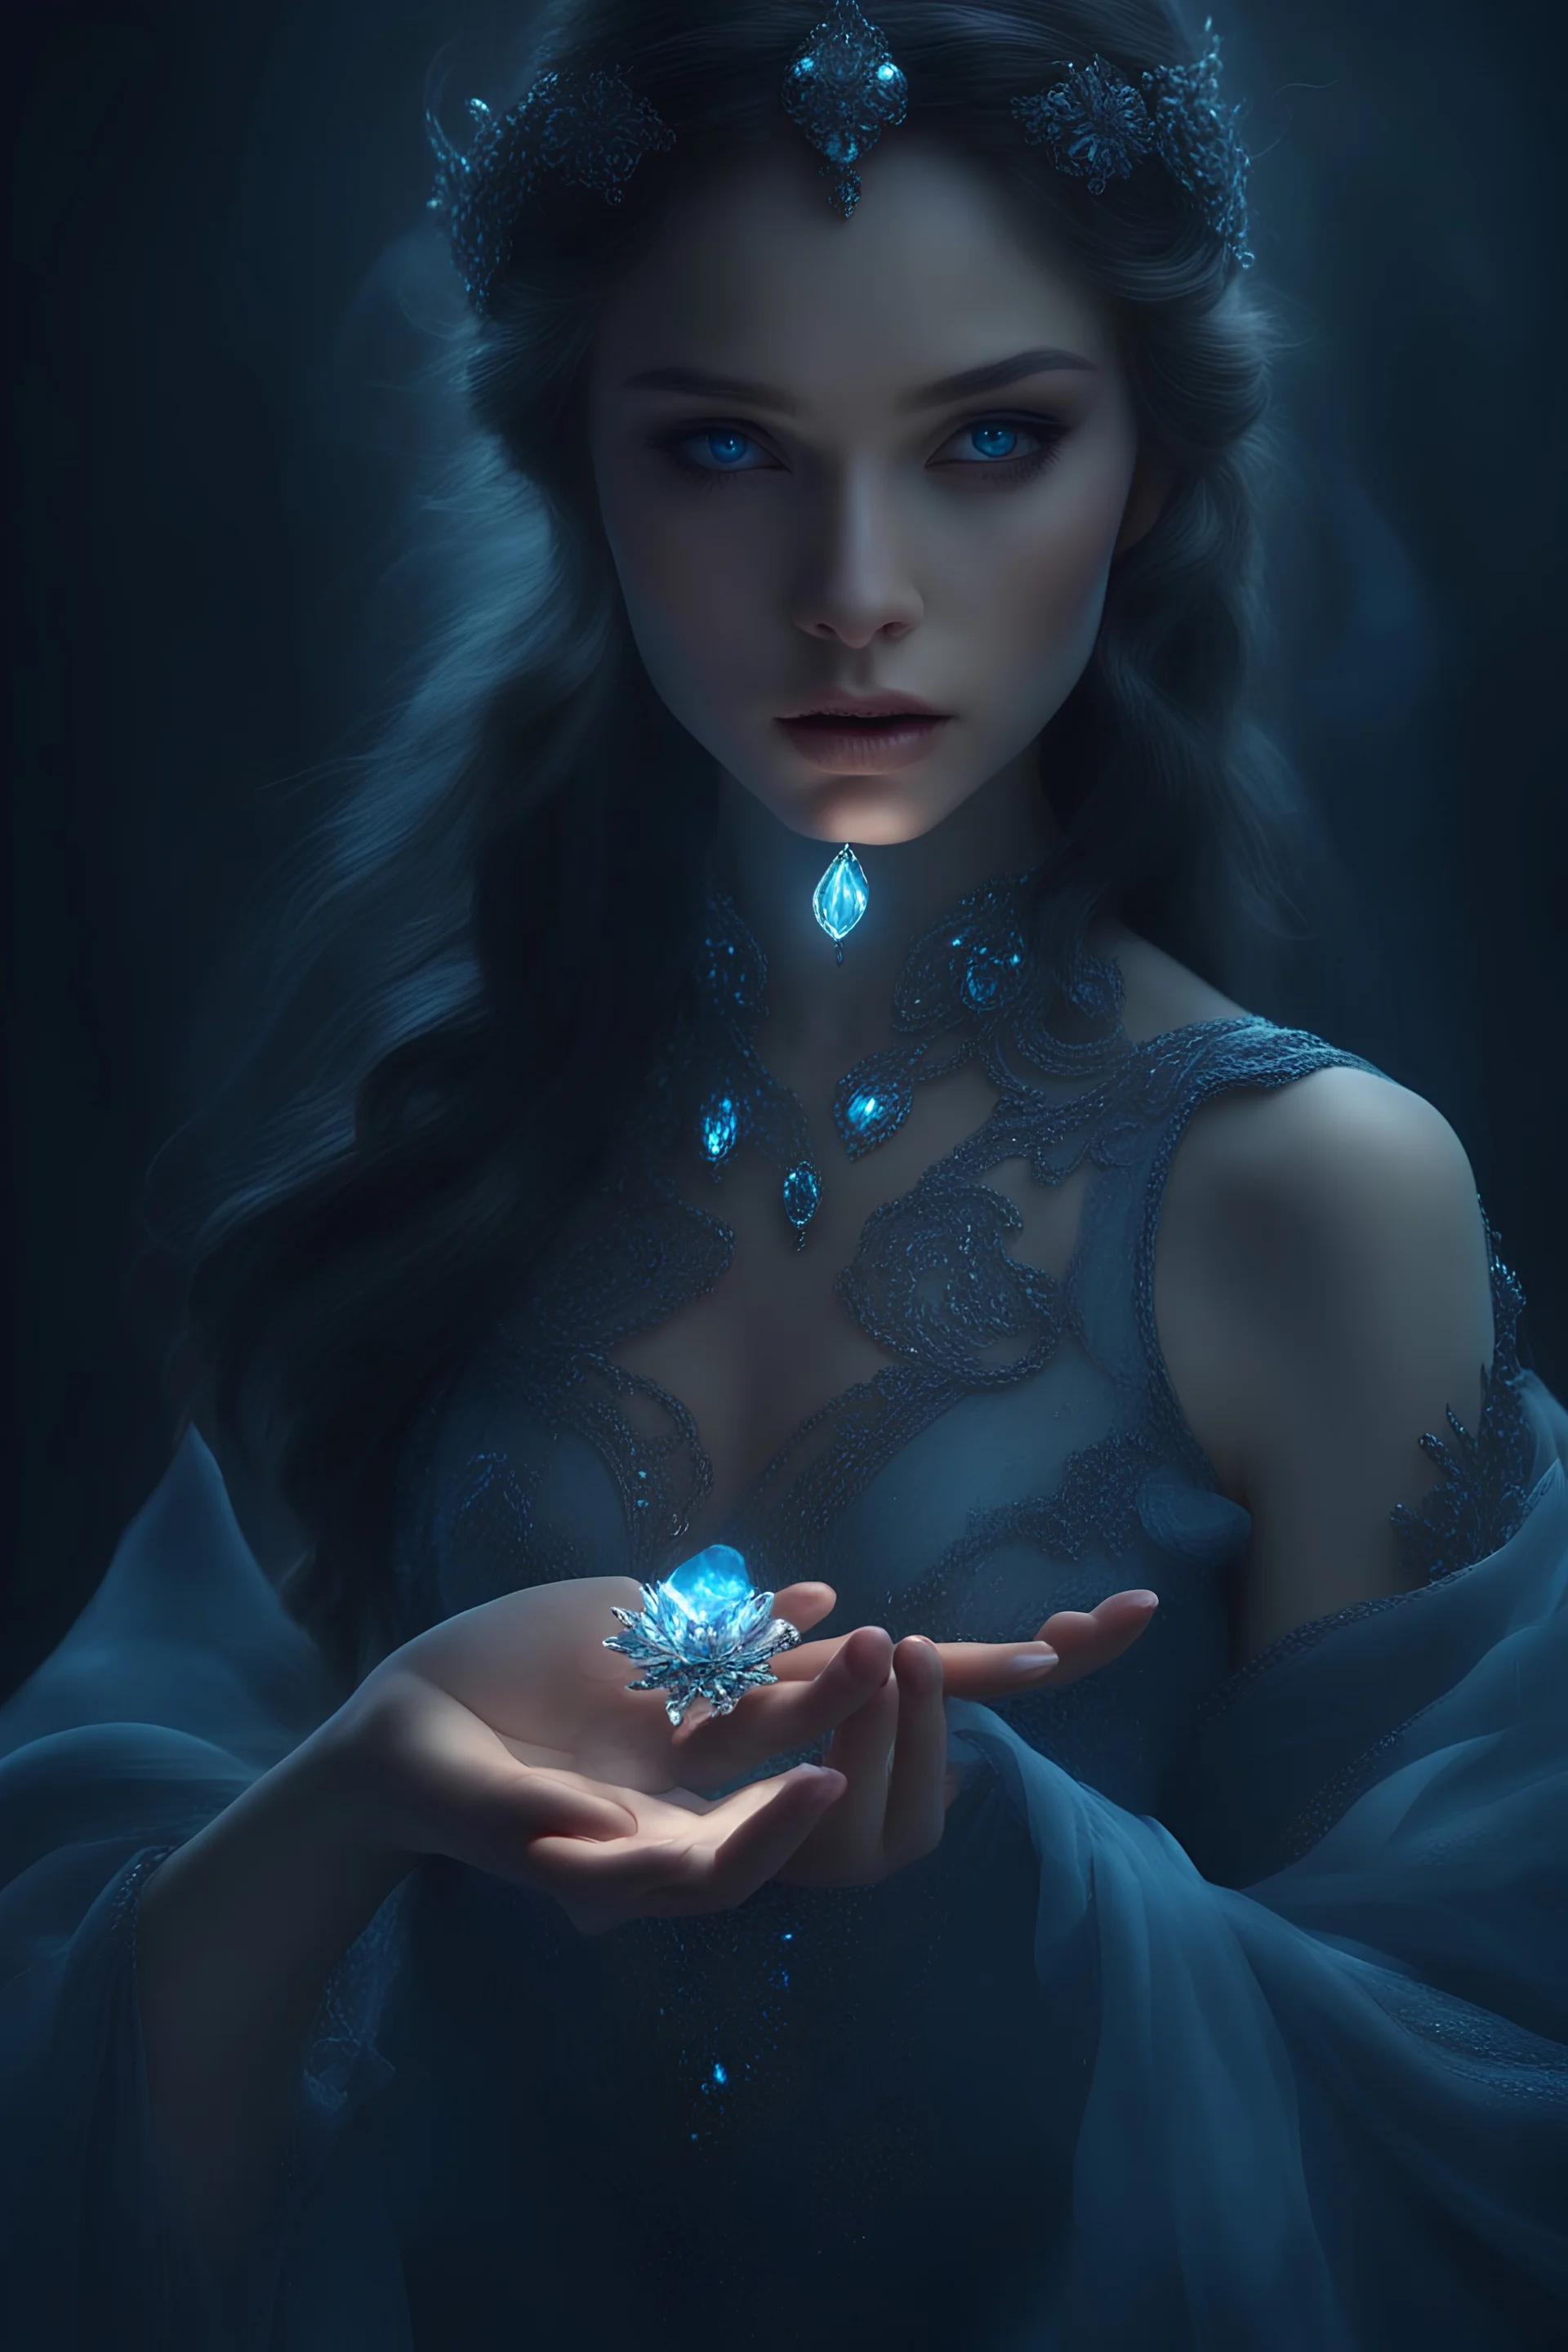 -fantasy style- in a dark place a hand Her skin glowed pale blue lighted like azure holding a glittering jewel depths swirling with color